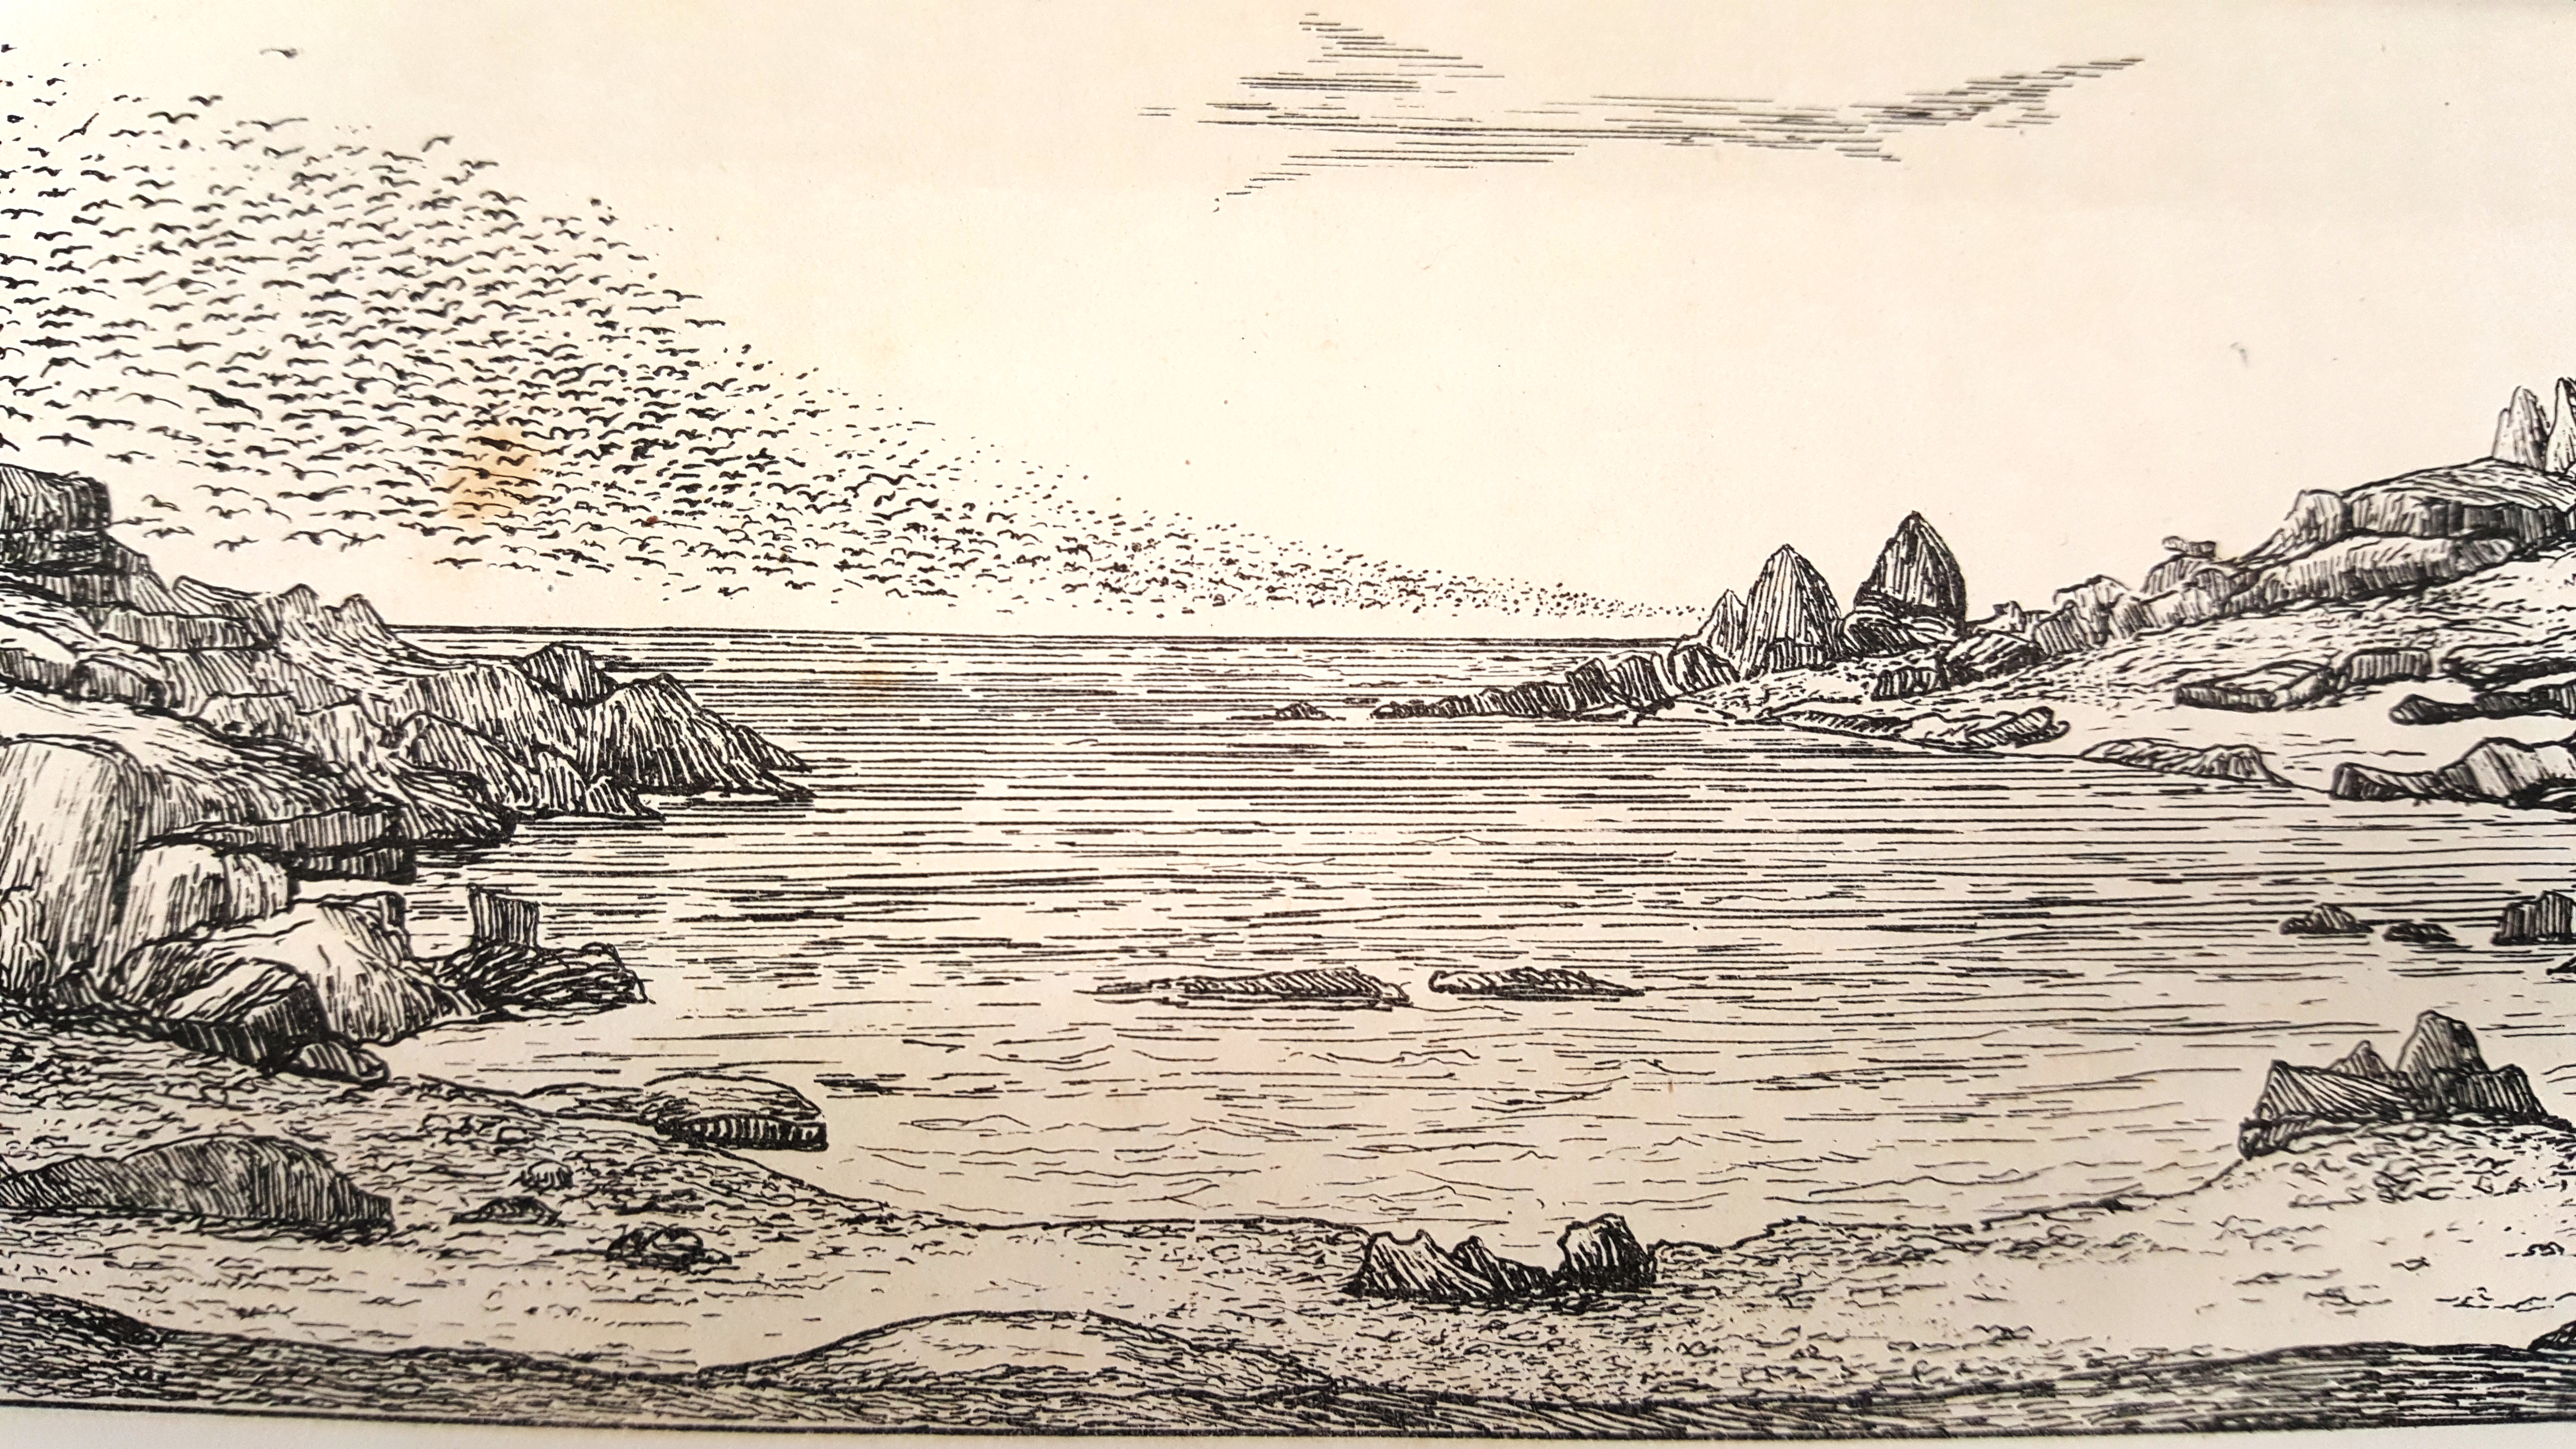 Unicorn Rocks, Badger Island, illustration by Rev. Brownrigg, Cruise of the Freak, 1872 , State Library of New South Wales